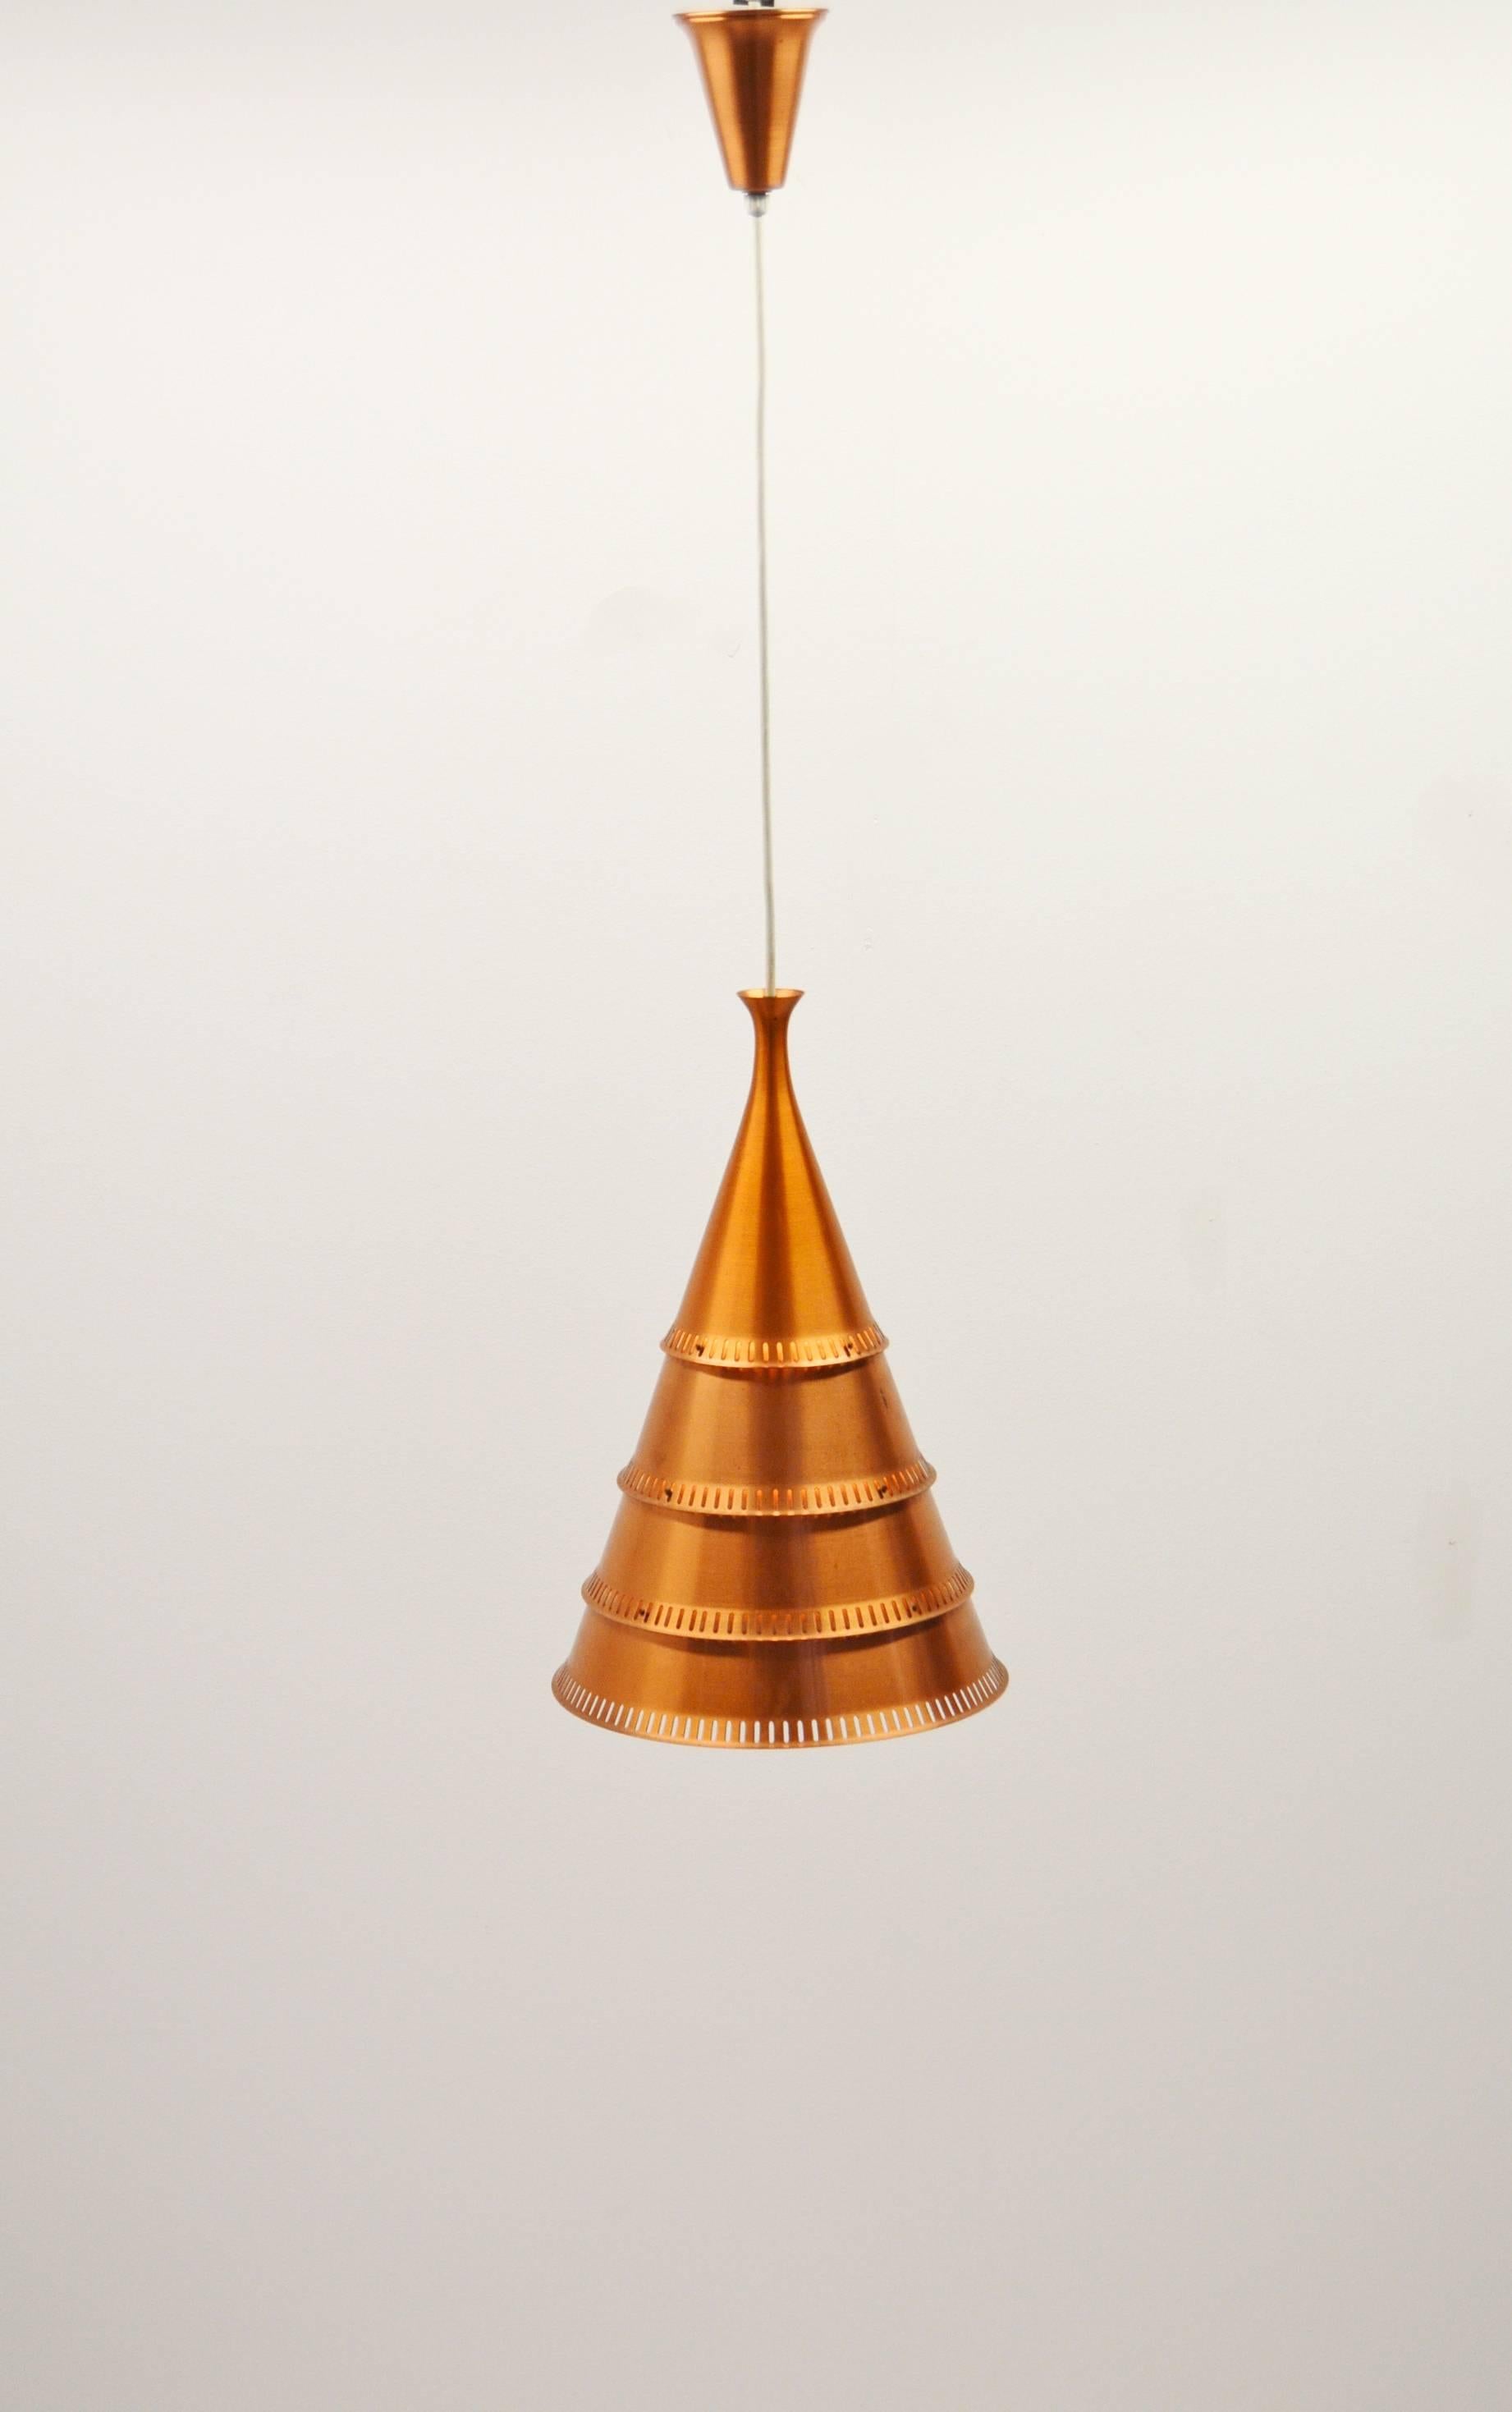 - Funnel shaped copper lamp
- Design Bengt Hjerting for Lyfa, Denmark
- Measures: Height 47 cm, excluding cord
- Adjustable height thanks to the cord
- European plug.
- E27 socket.